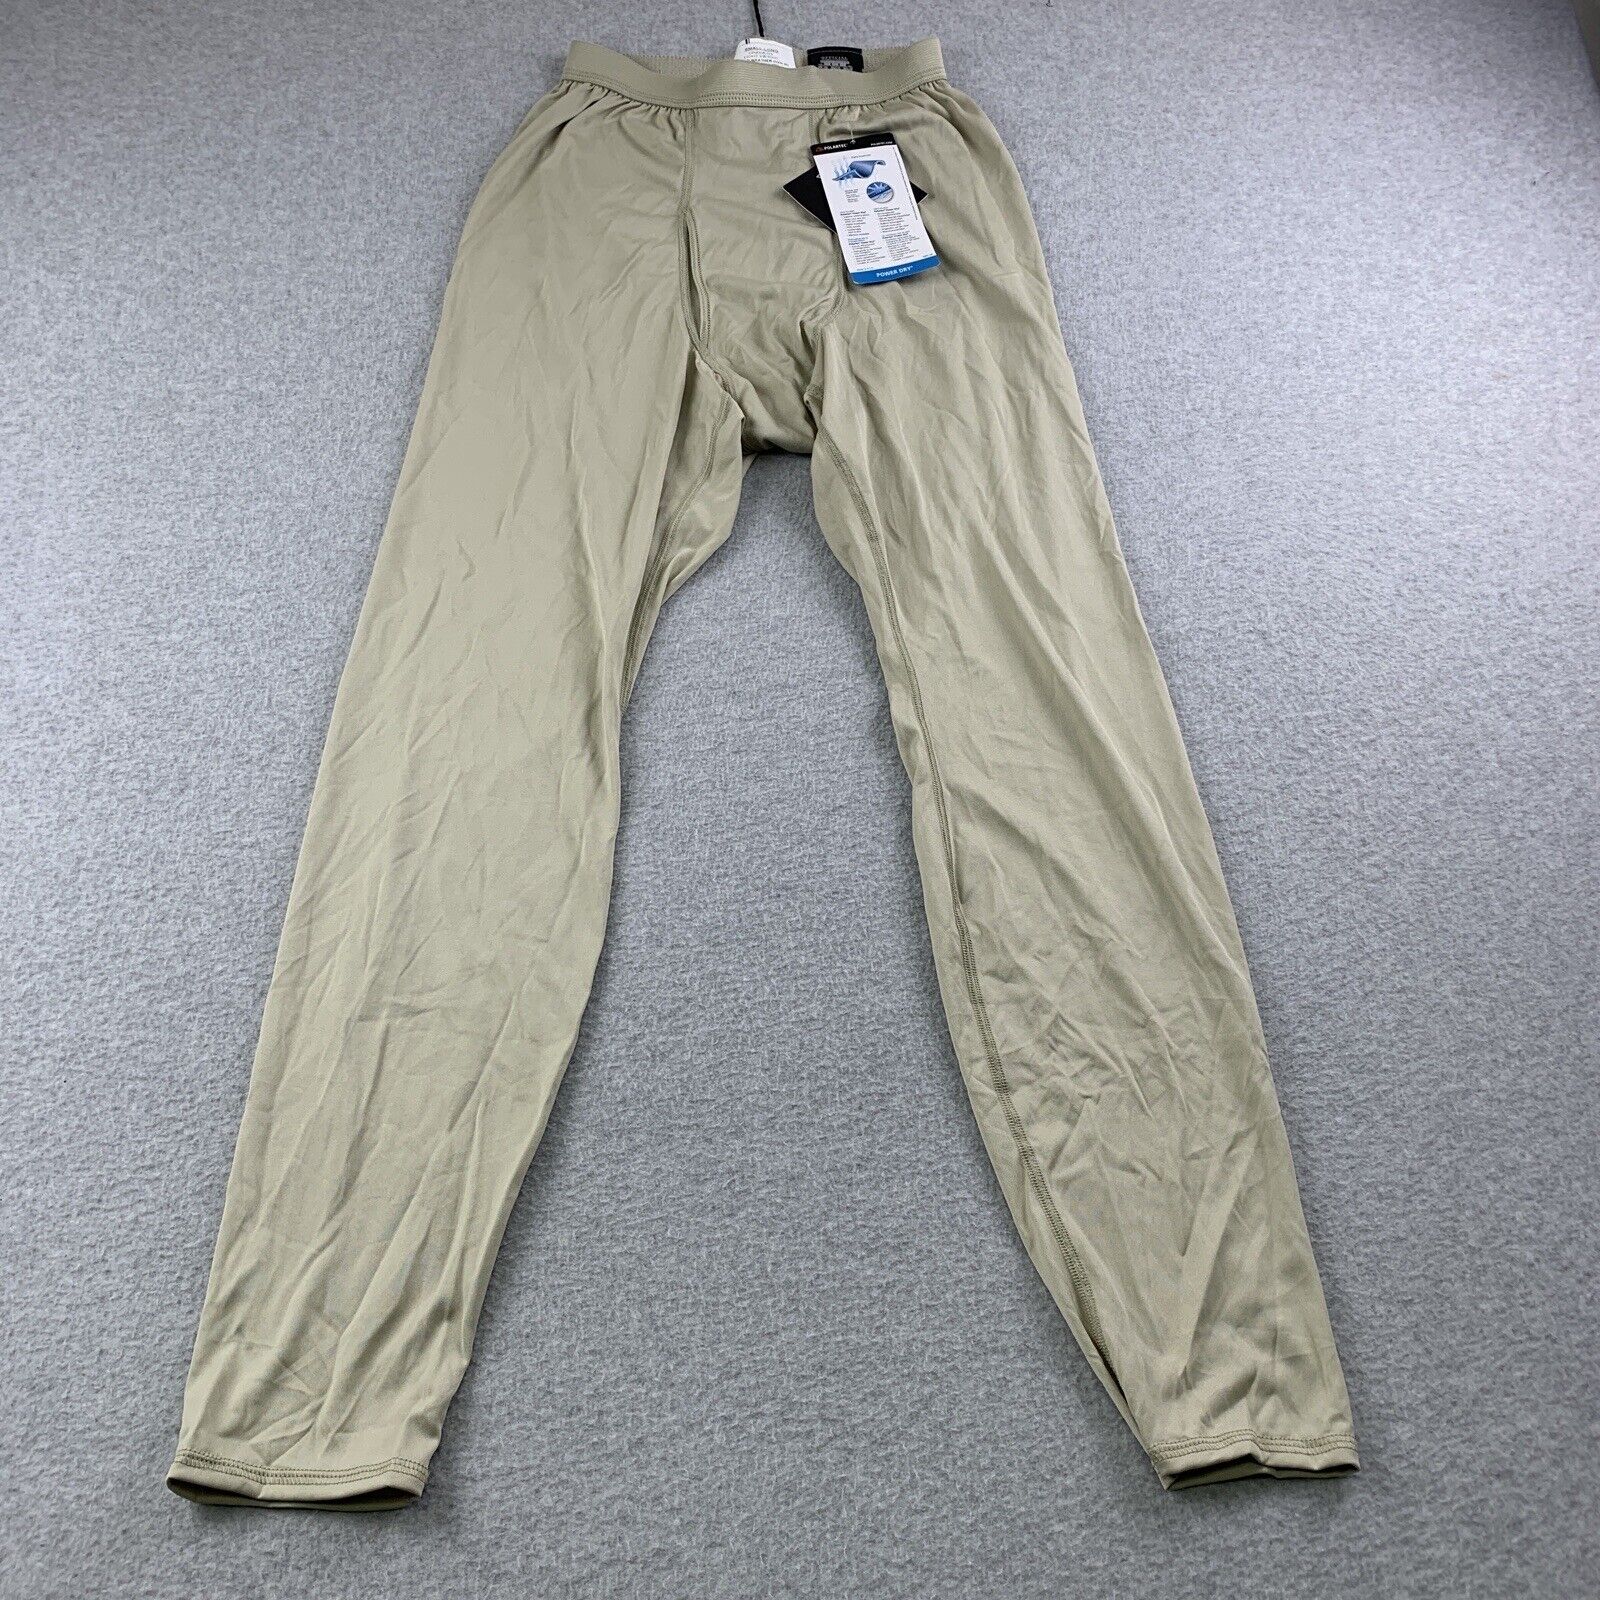 Official Gen III Pants Mens Small Long Drawers Lightweight Cold Weather Polartec